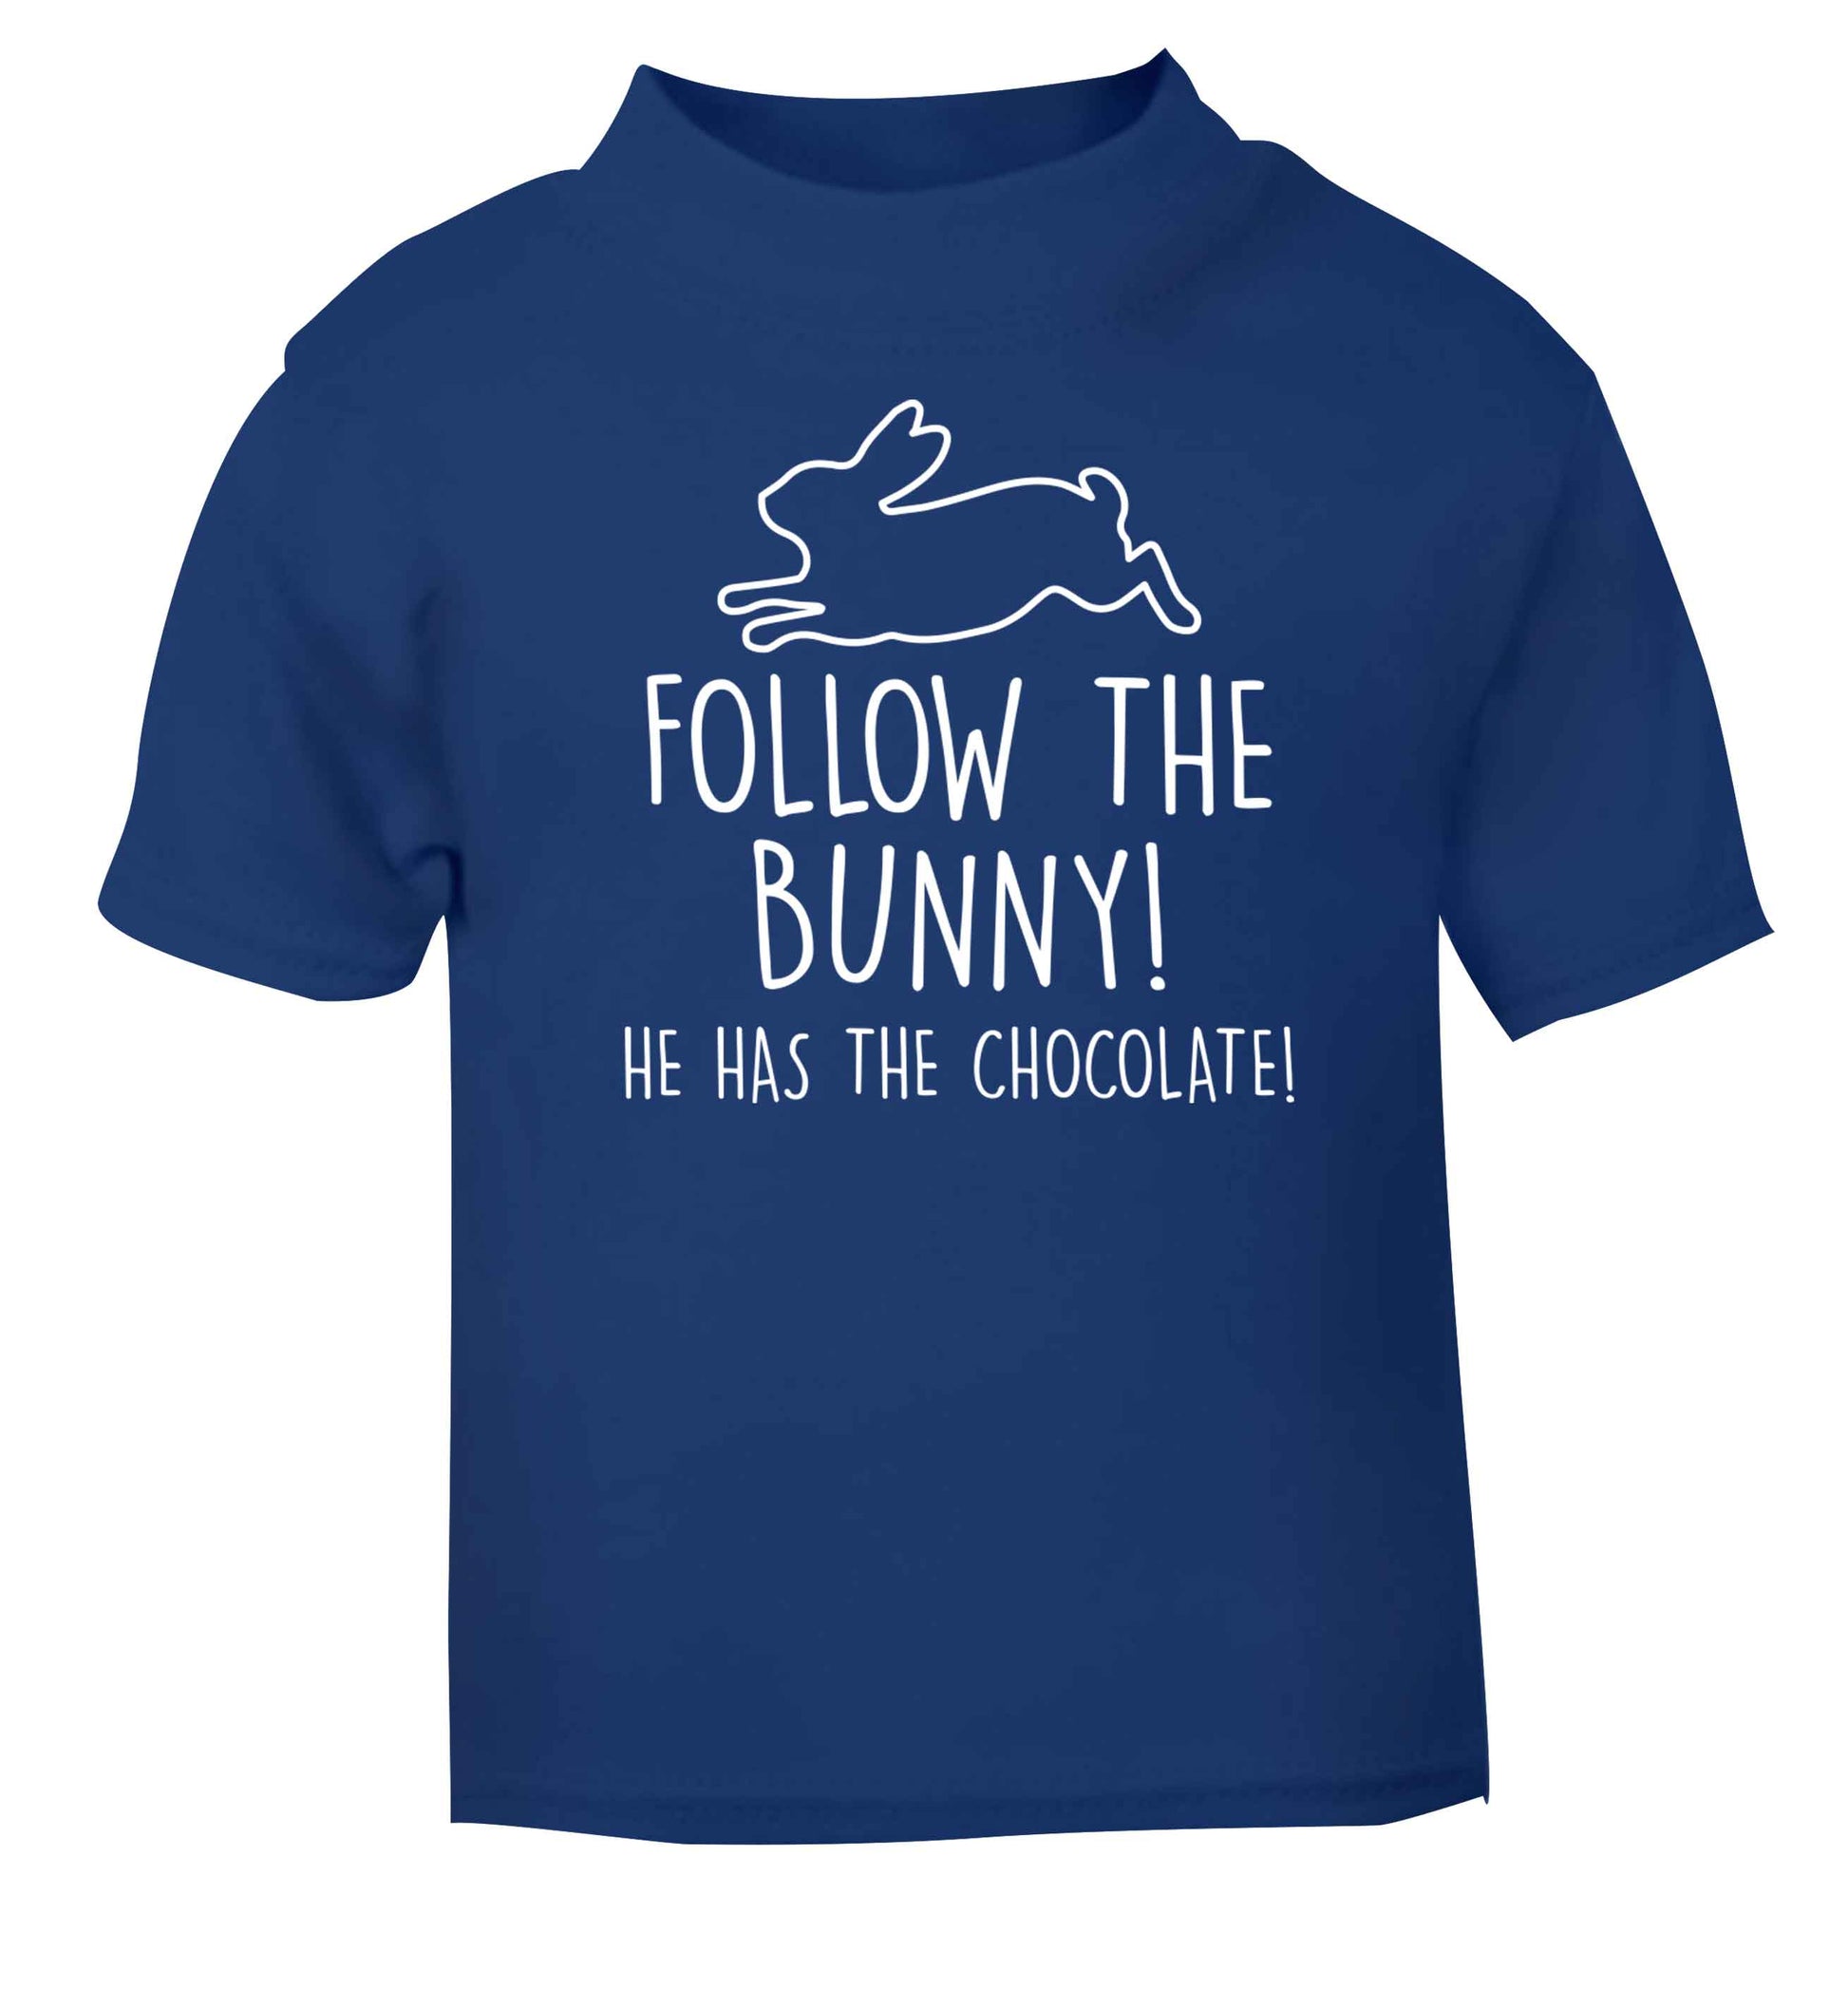 Follow the bunny! He has the chocolate blue baby toddler Tshirt 2 Years